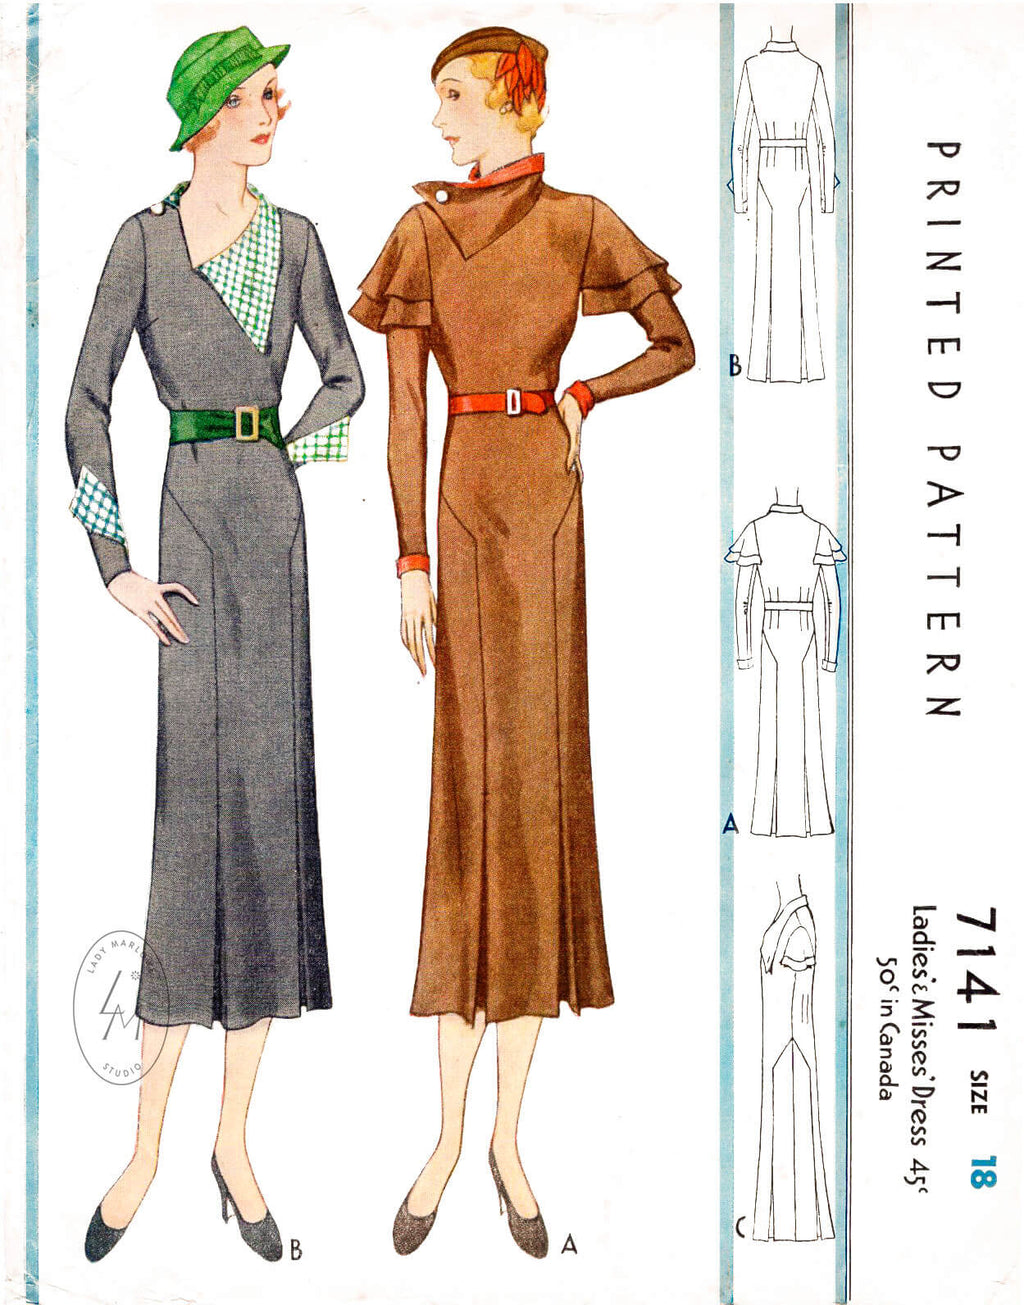 McCall 7141 1930s 1933 art deco dress vintage sewing pattern reproduction